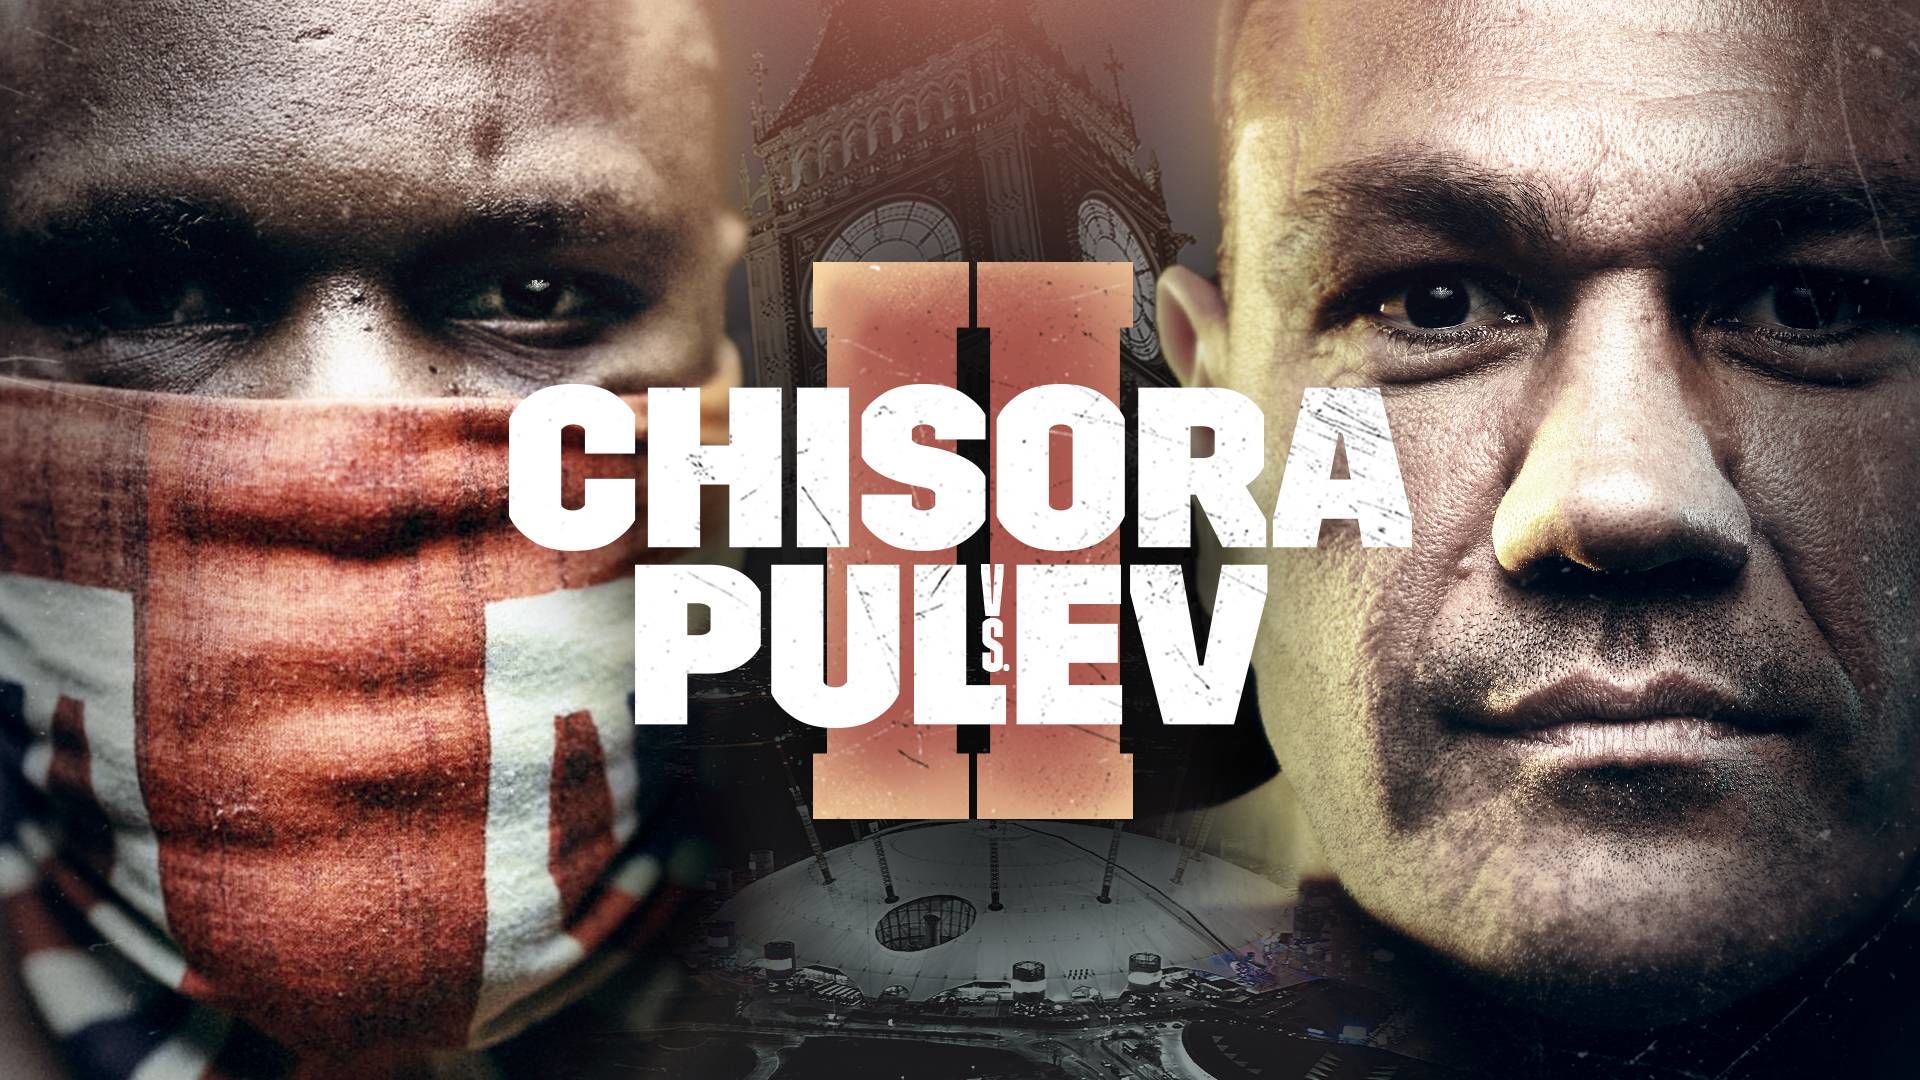 Derek Chisora vs. Kubrat Pulev: Preview, Where to watch, and Bet odds